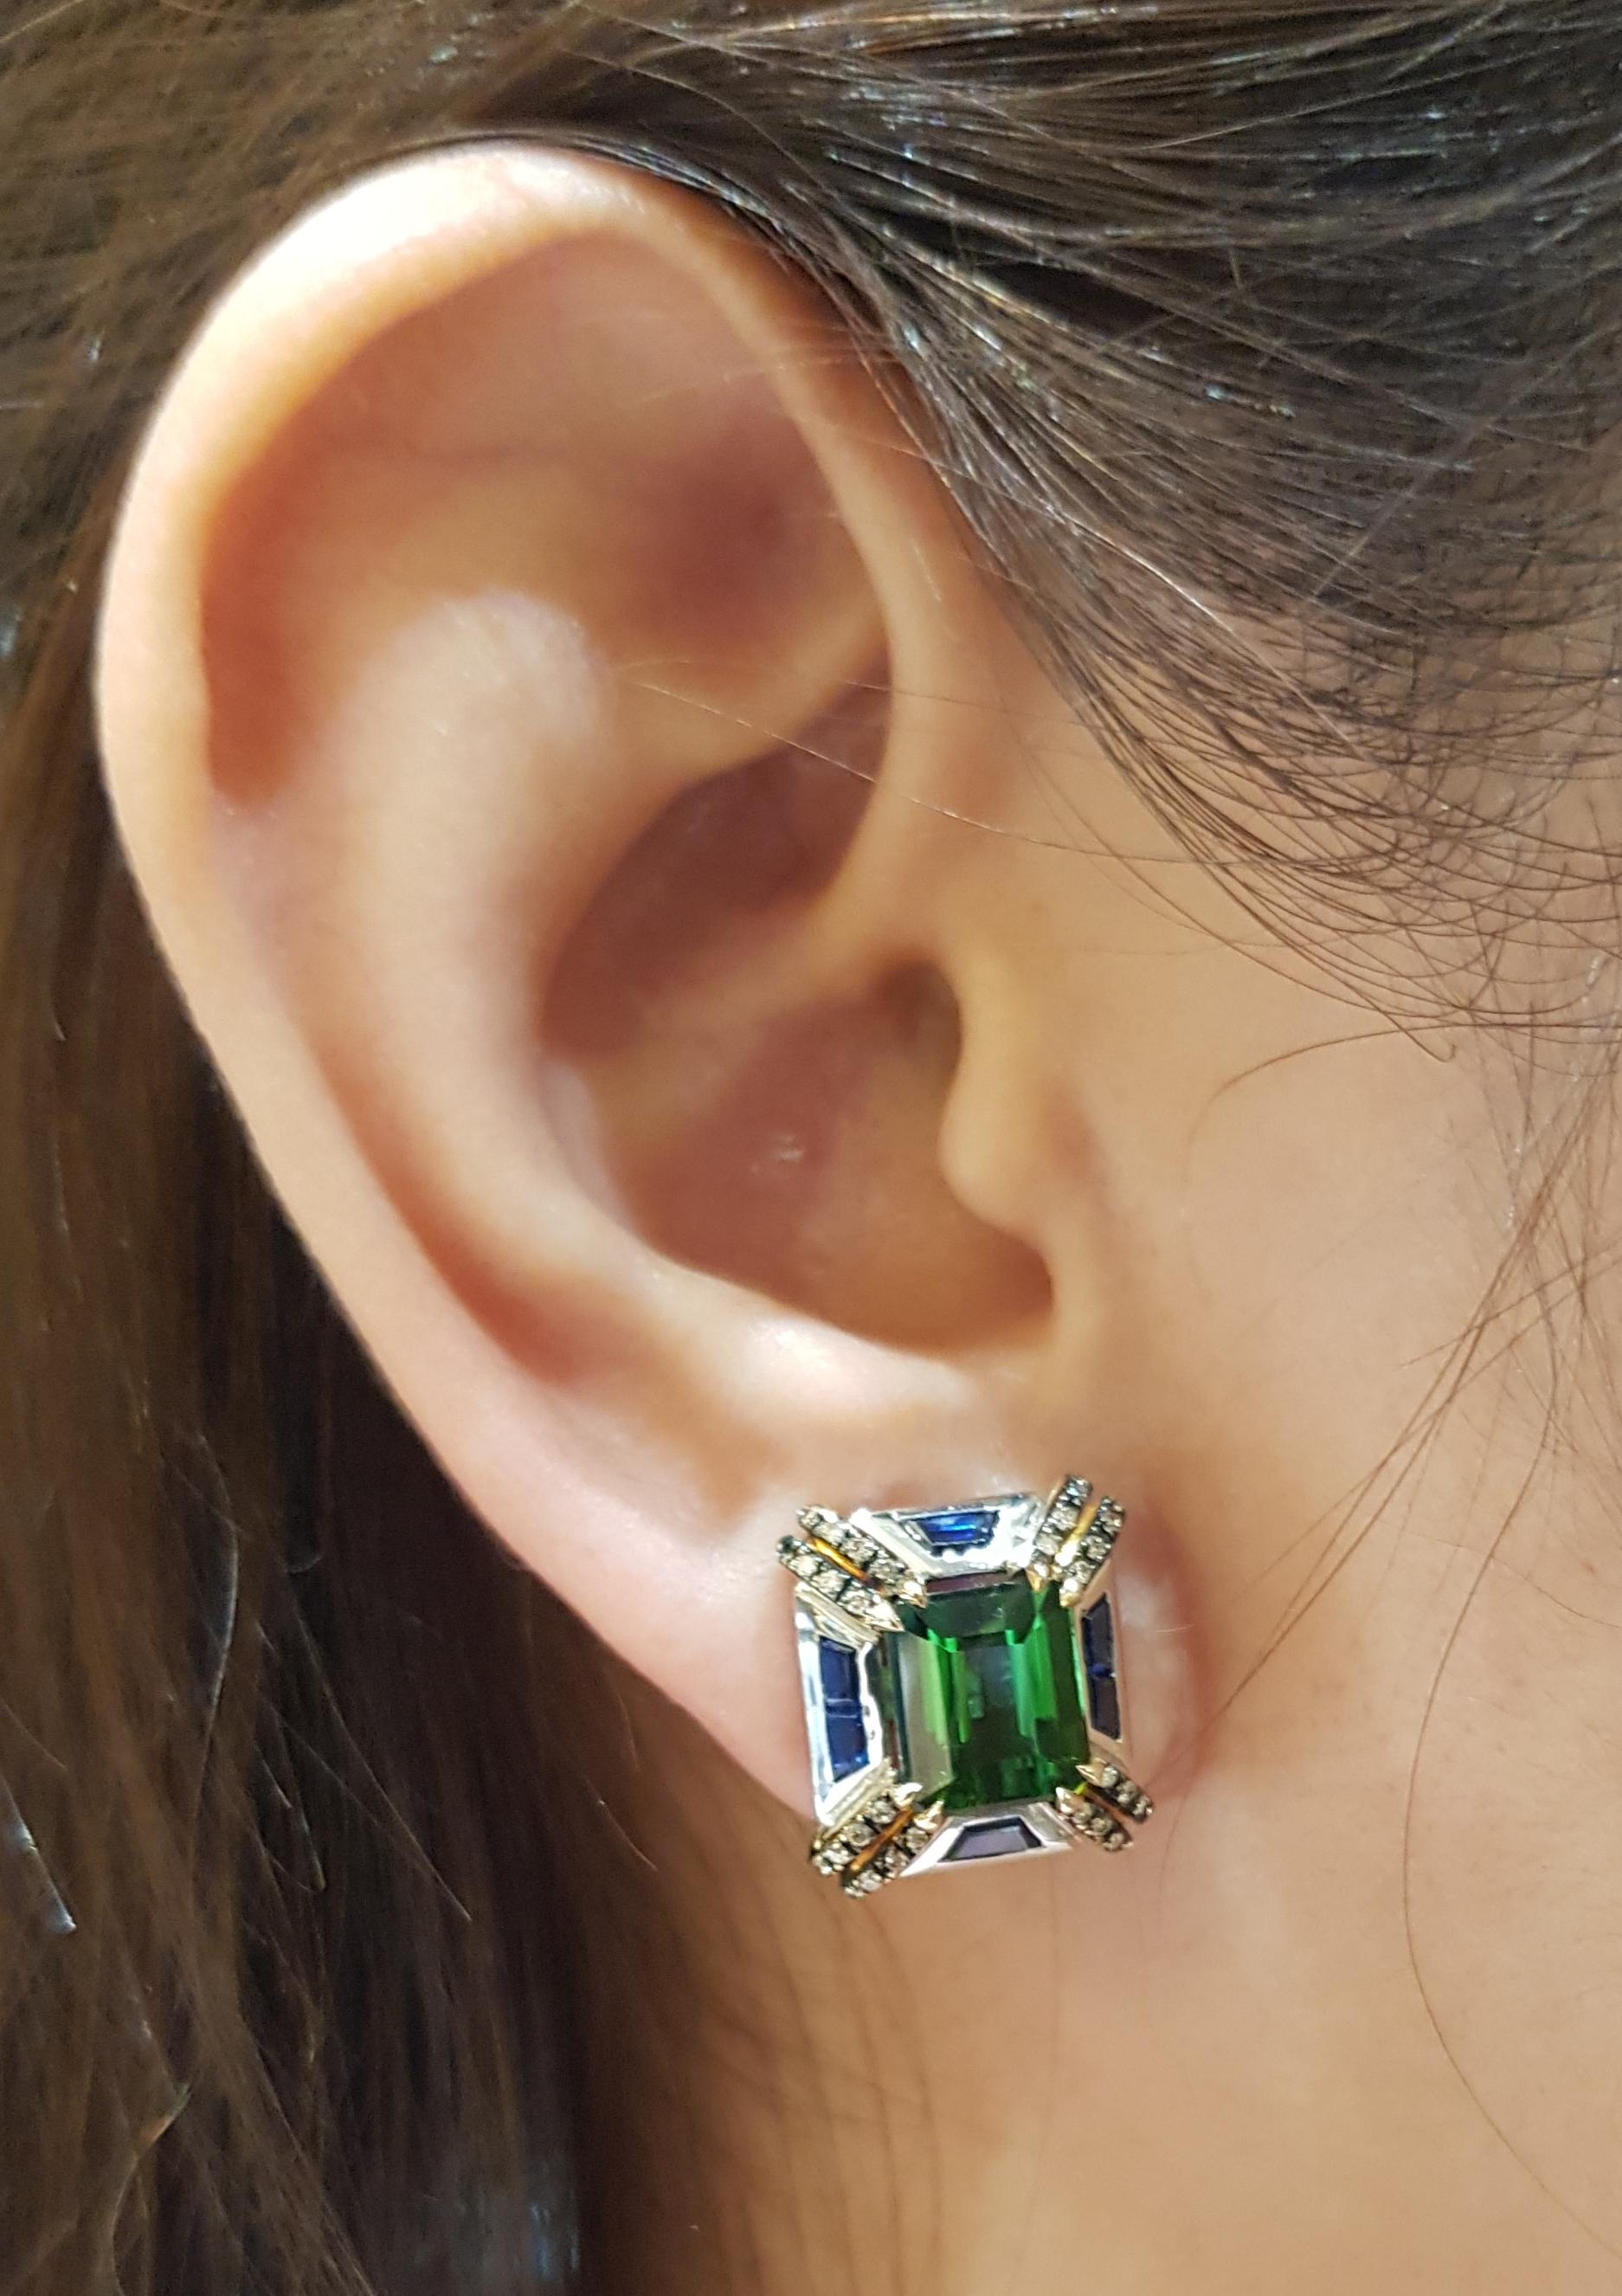 Green Tourmaline 6.50 carats with Blue Sapphire 2.70 carats and Brown Diamond 0.36 carats Earrings set in 18 Karat Gold Settings

Width:  1.3 cm 
Length: 1.5 cm
Total Weight: 11.21 grams

